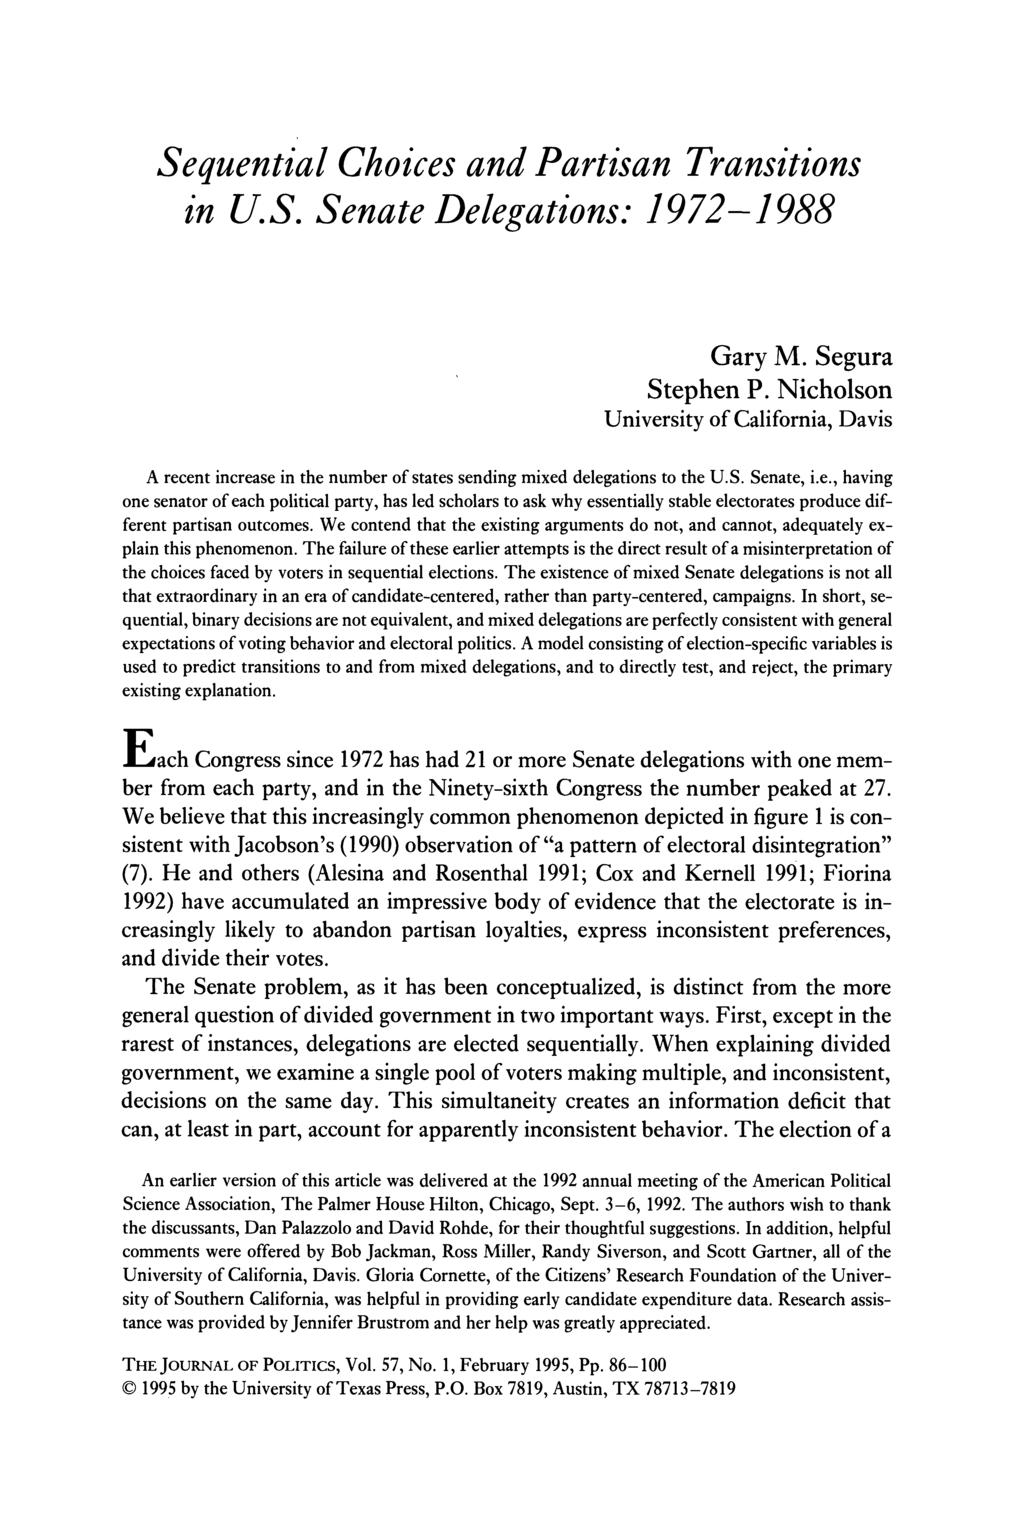 Sequential Choices and Partisan Transitions in U.S. Senate Delegations: 1972-1988 Gary M. Segura Stephen P.